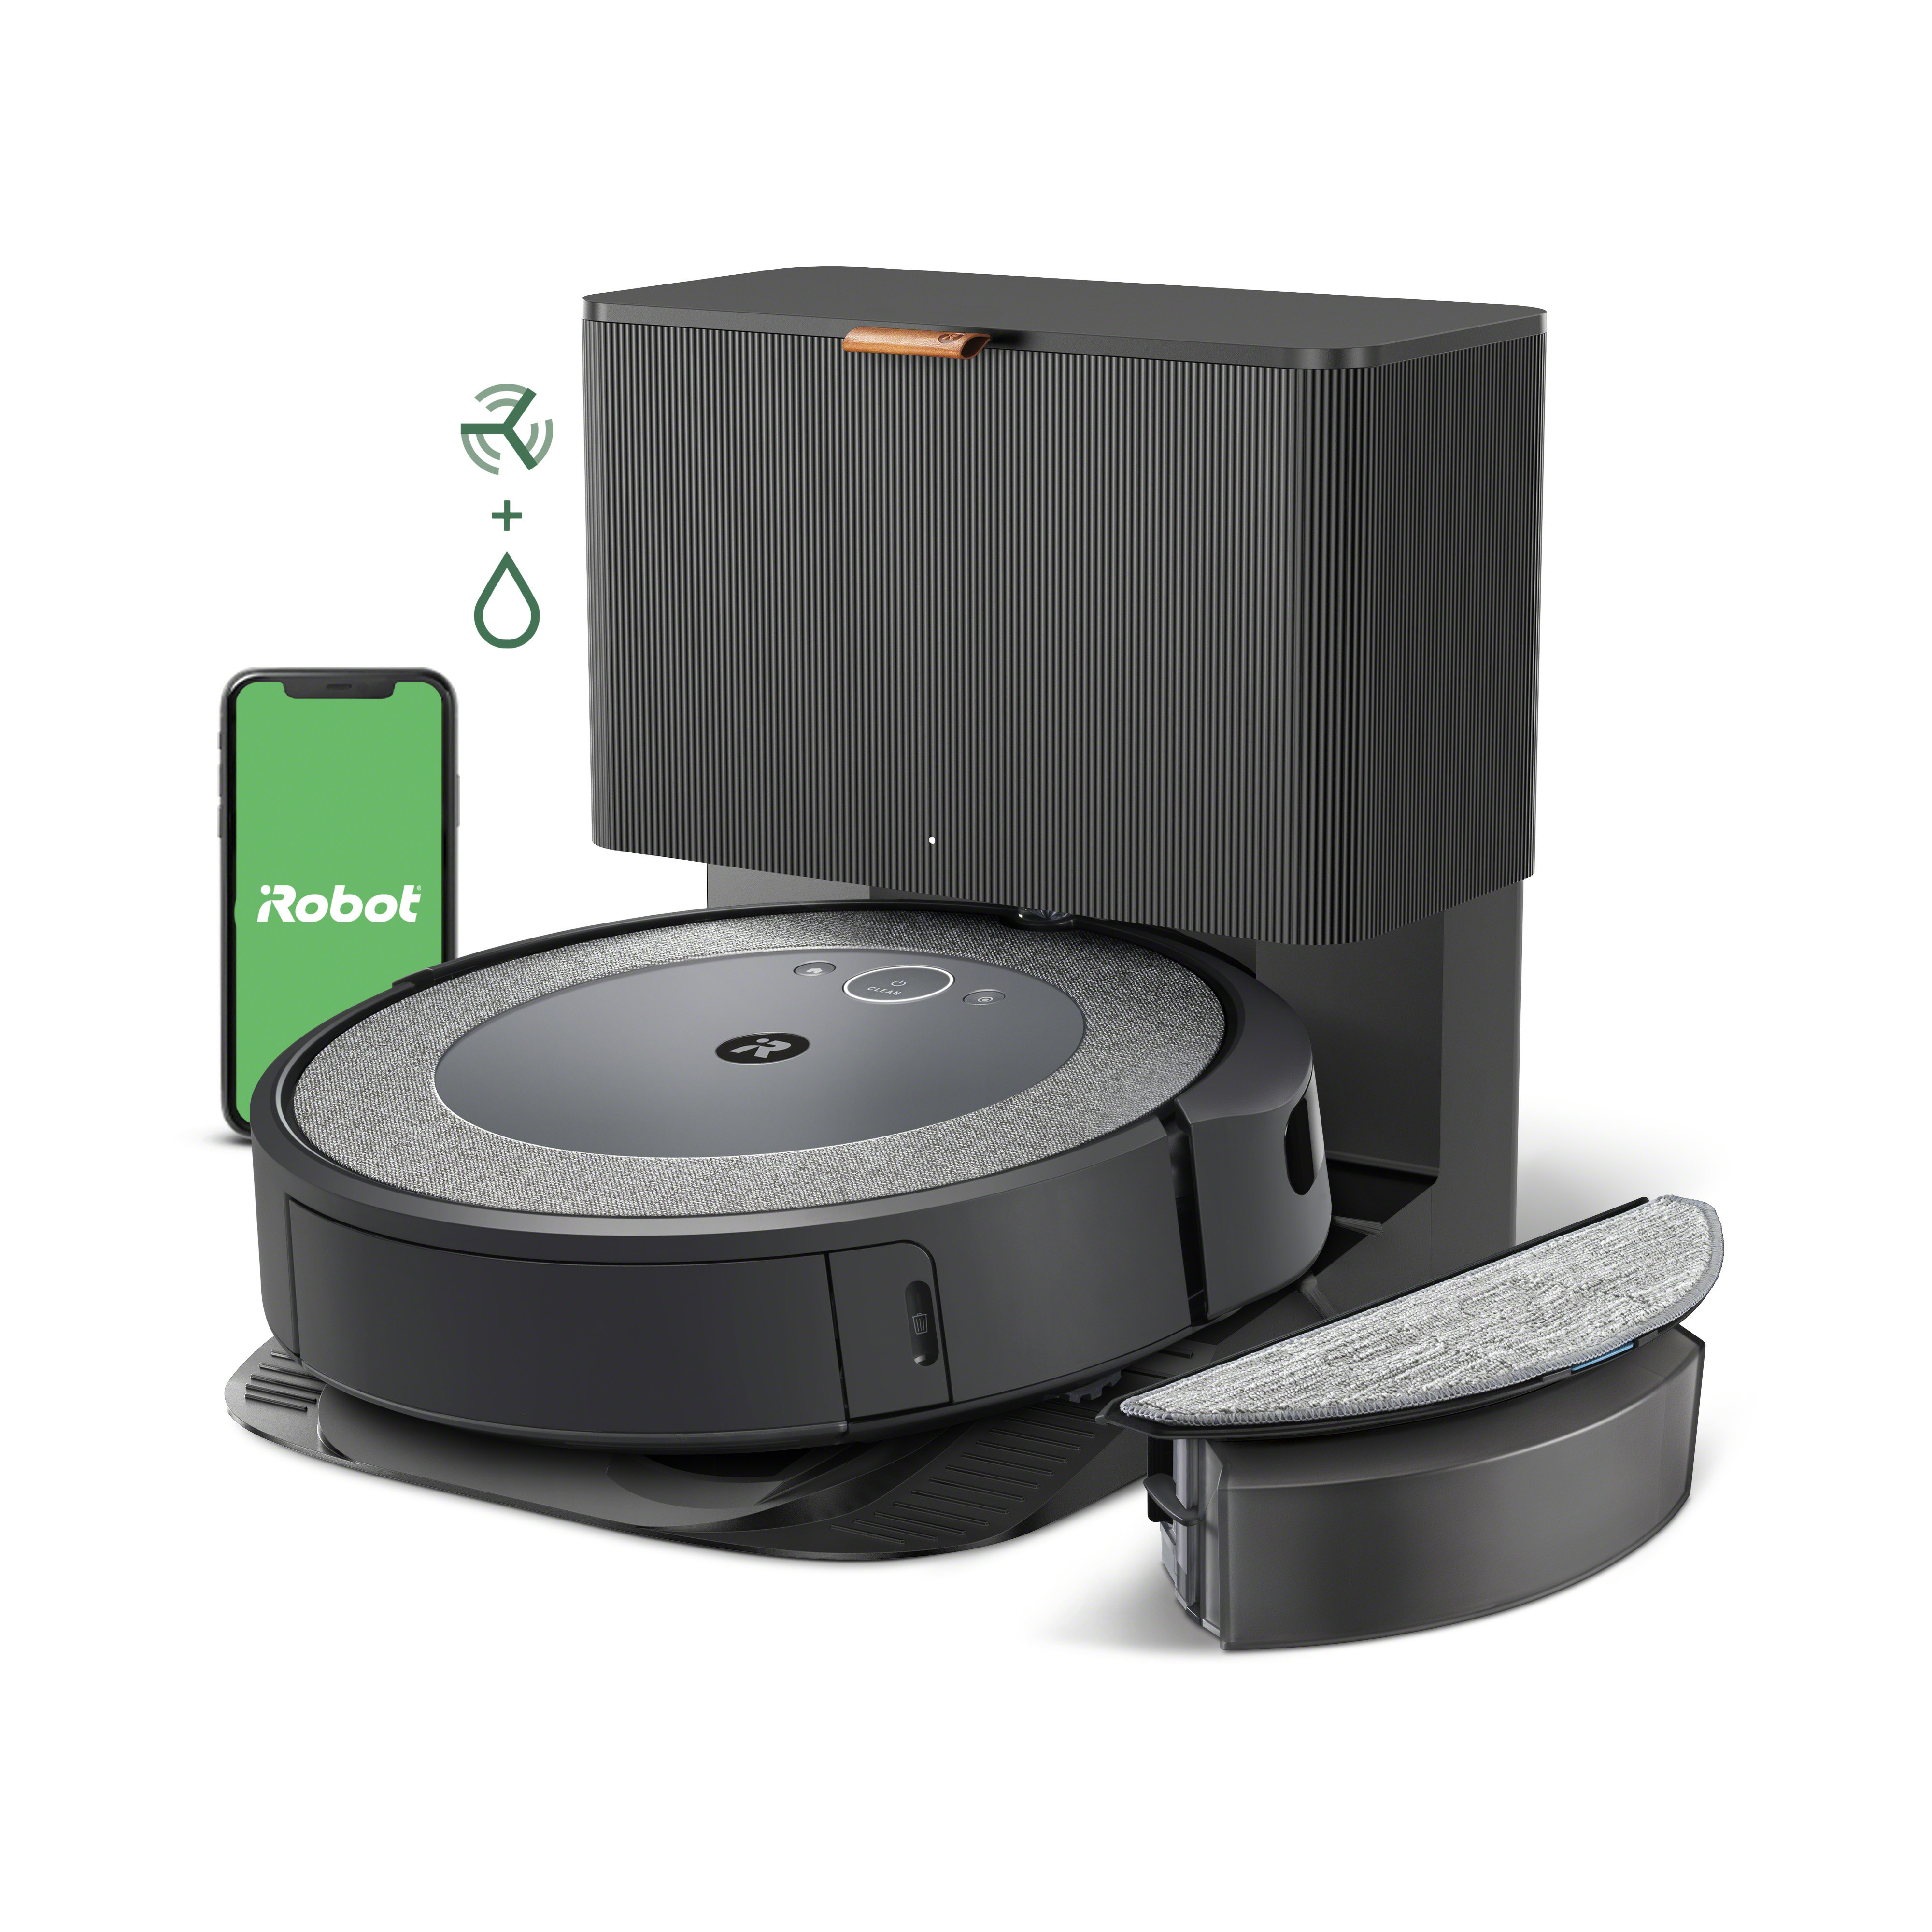 iRobot roomba i7 vacuum review: Can the smart robot keep your